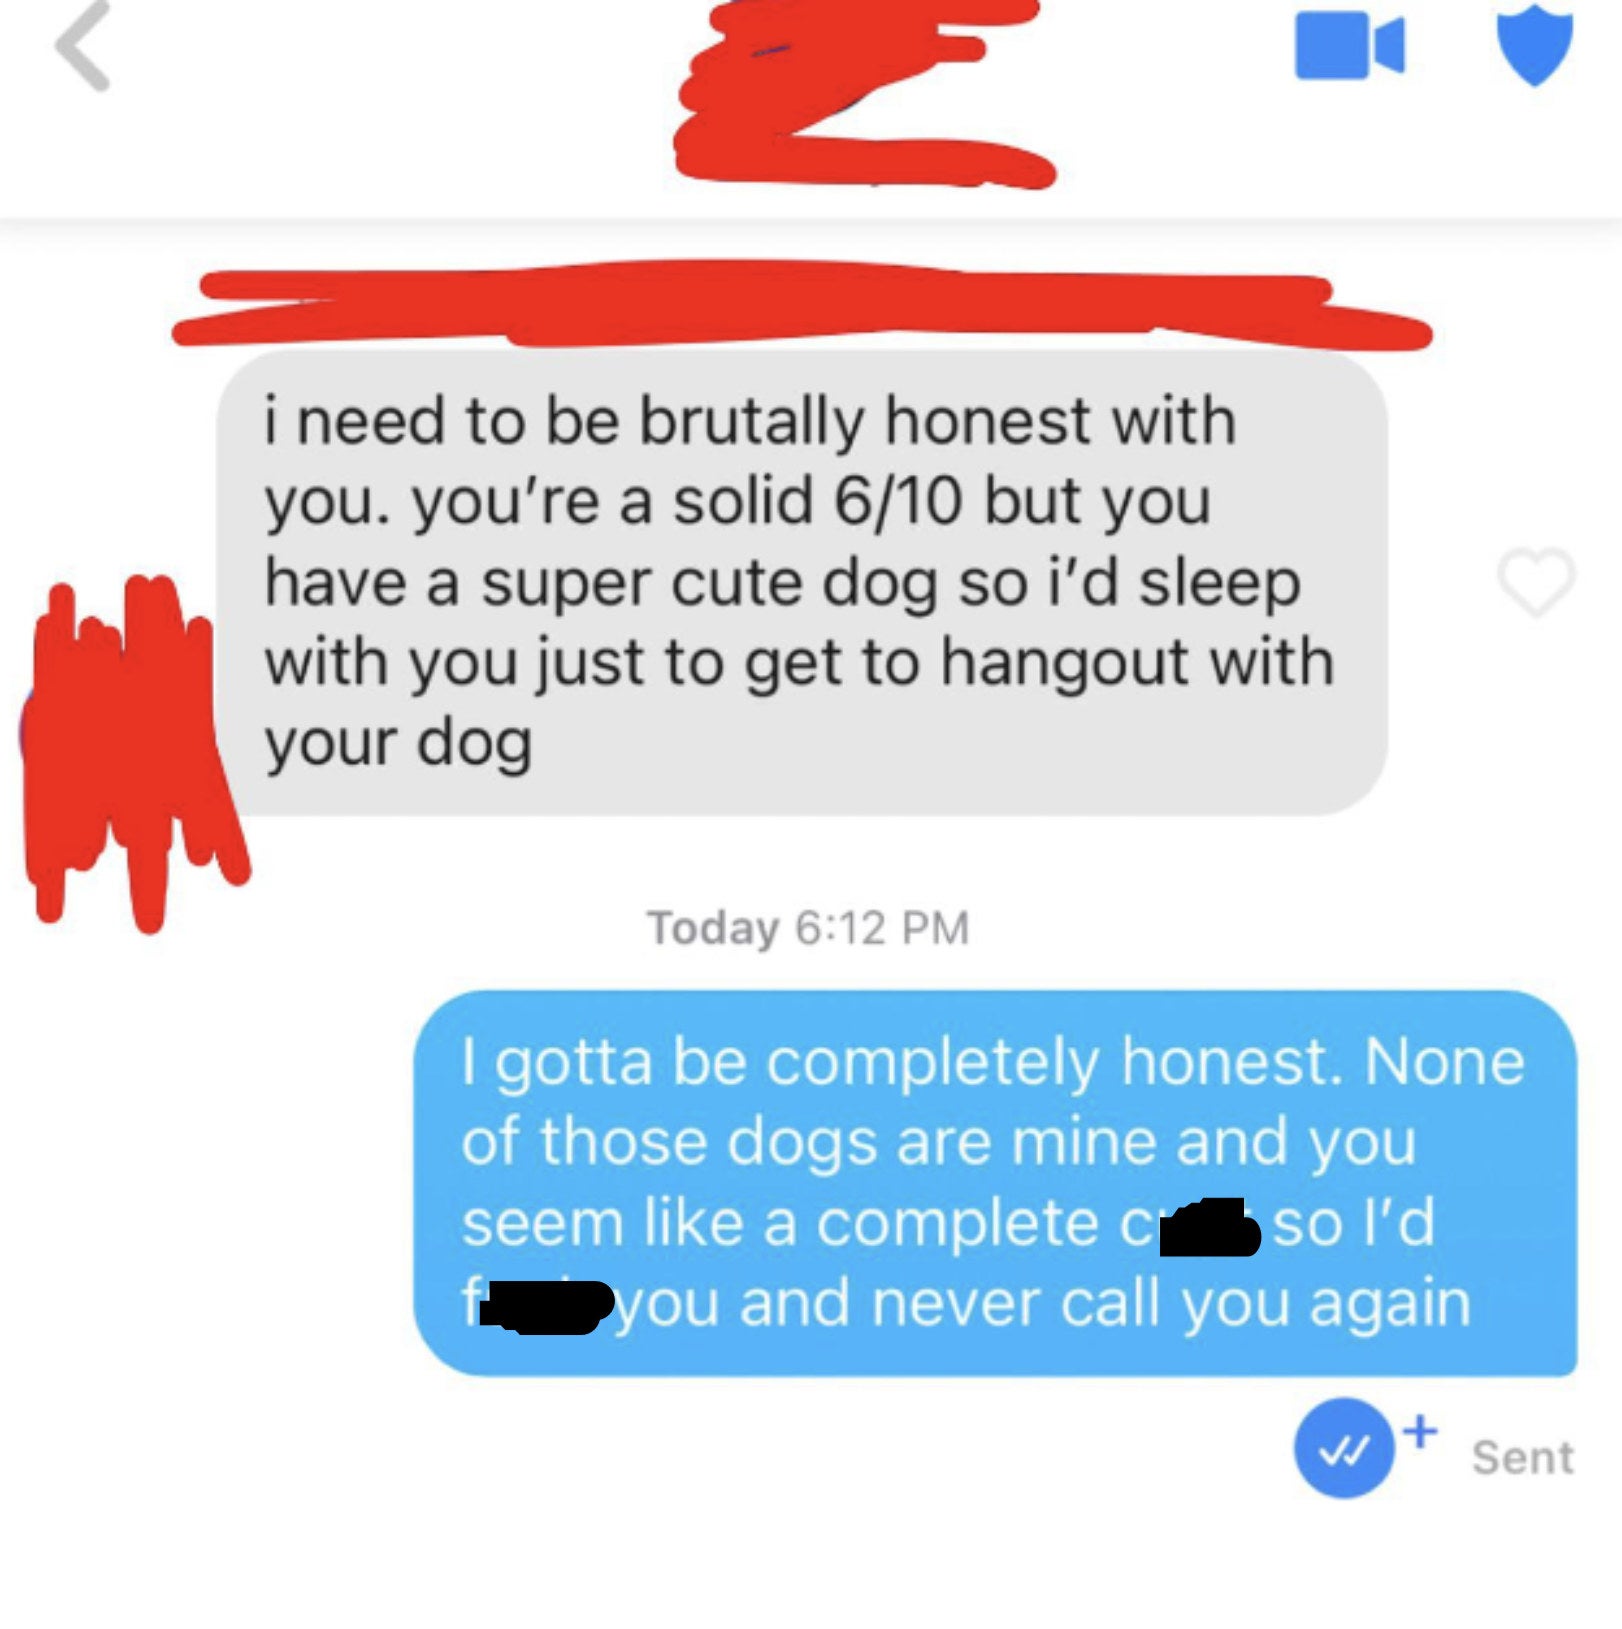 person 1: you&#x27;re a solid six out of 10 but you have a super cute dog so i&#x27;d sleep with you just to get a to hangout with your dog person 2: none of those dogs are mine and you seem like a complete ass so i&#x27;d fuck you and never call again